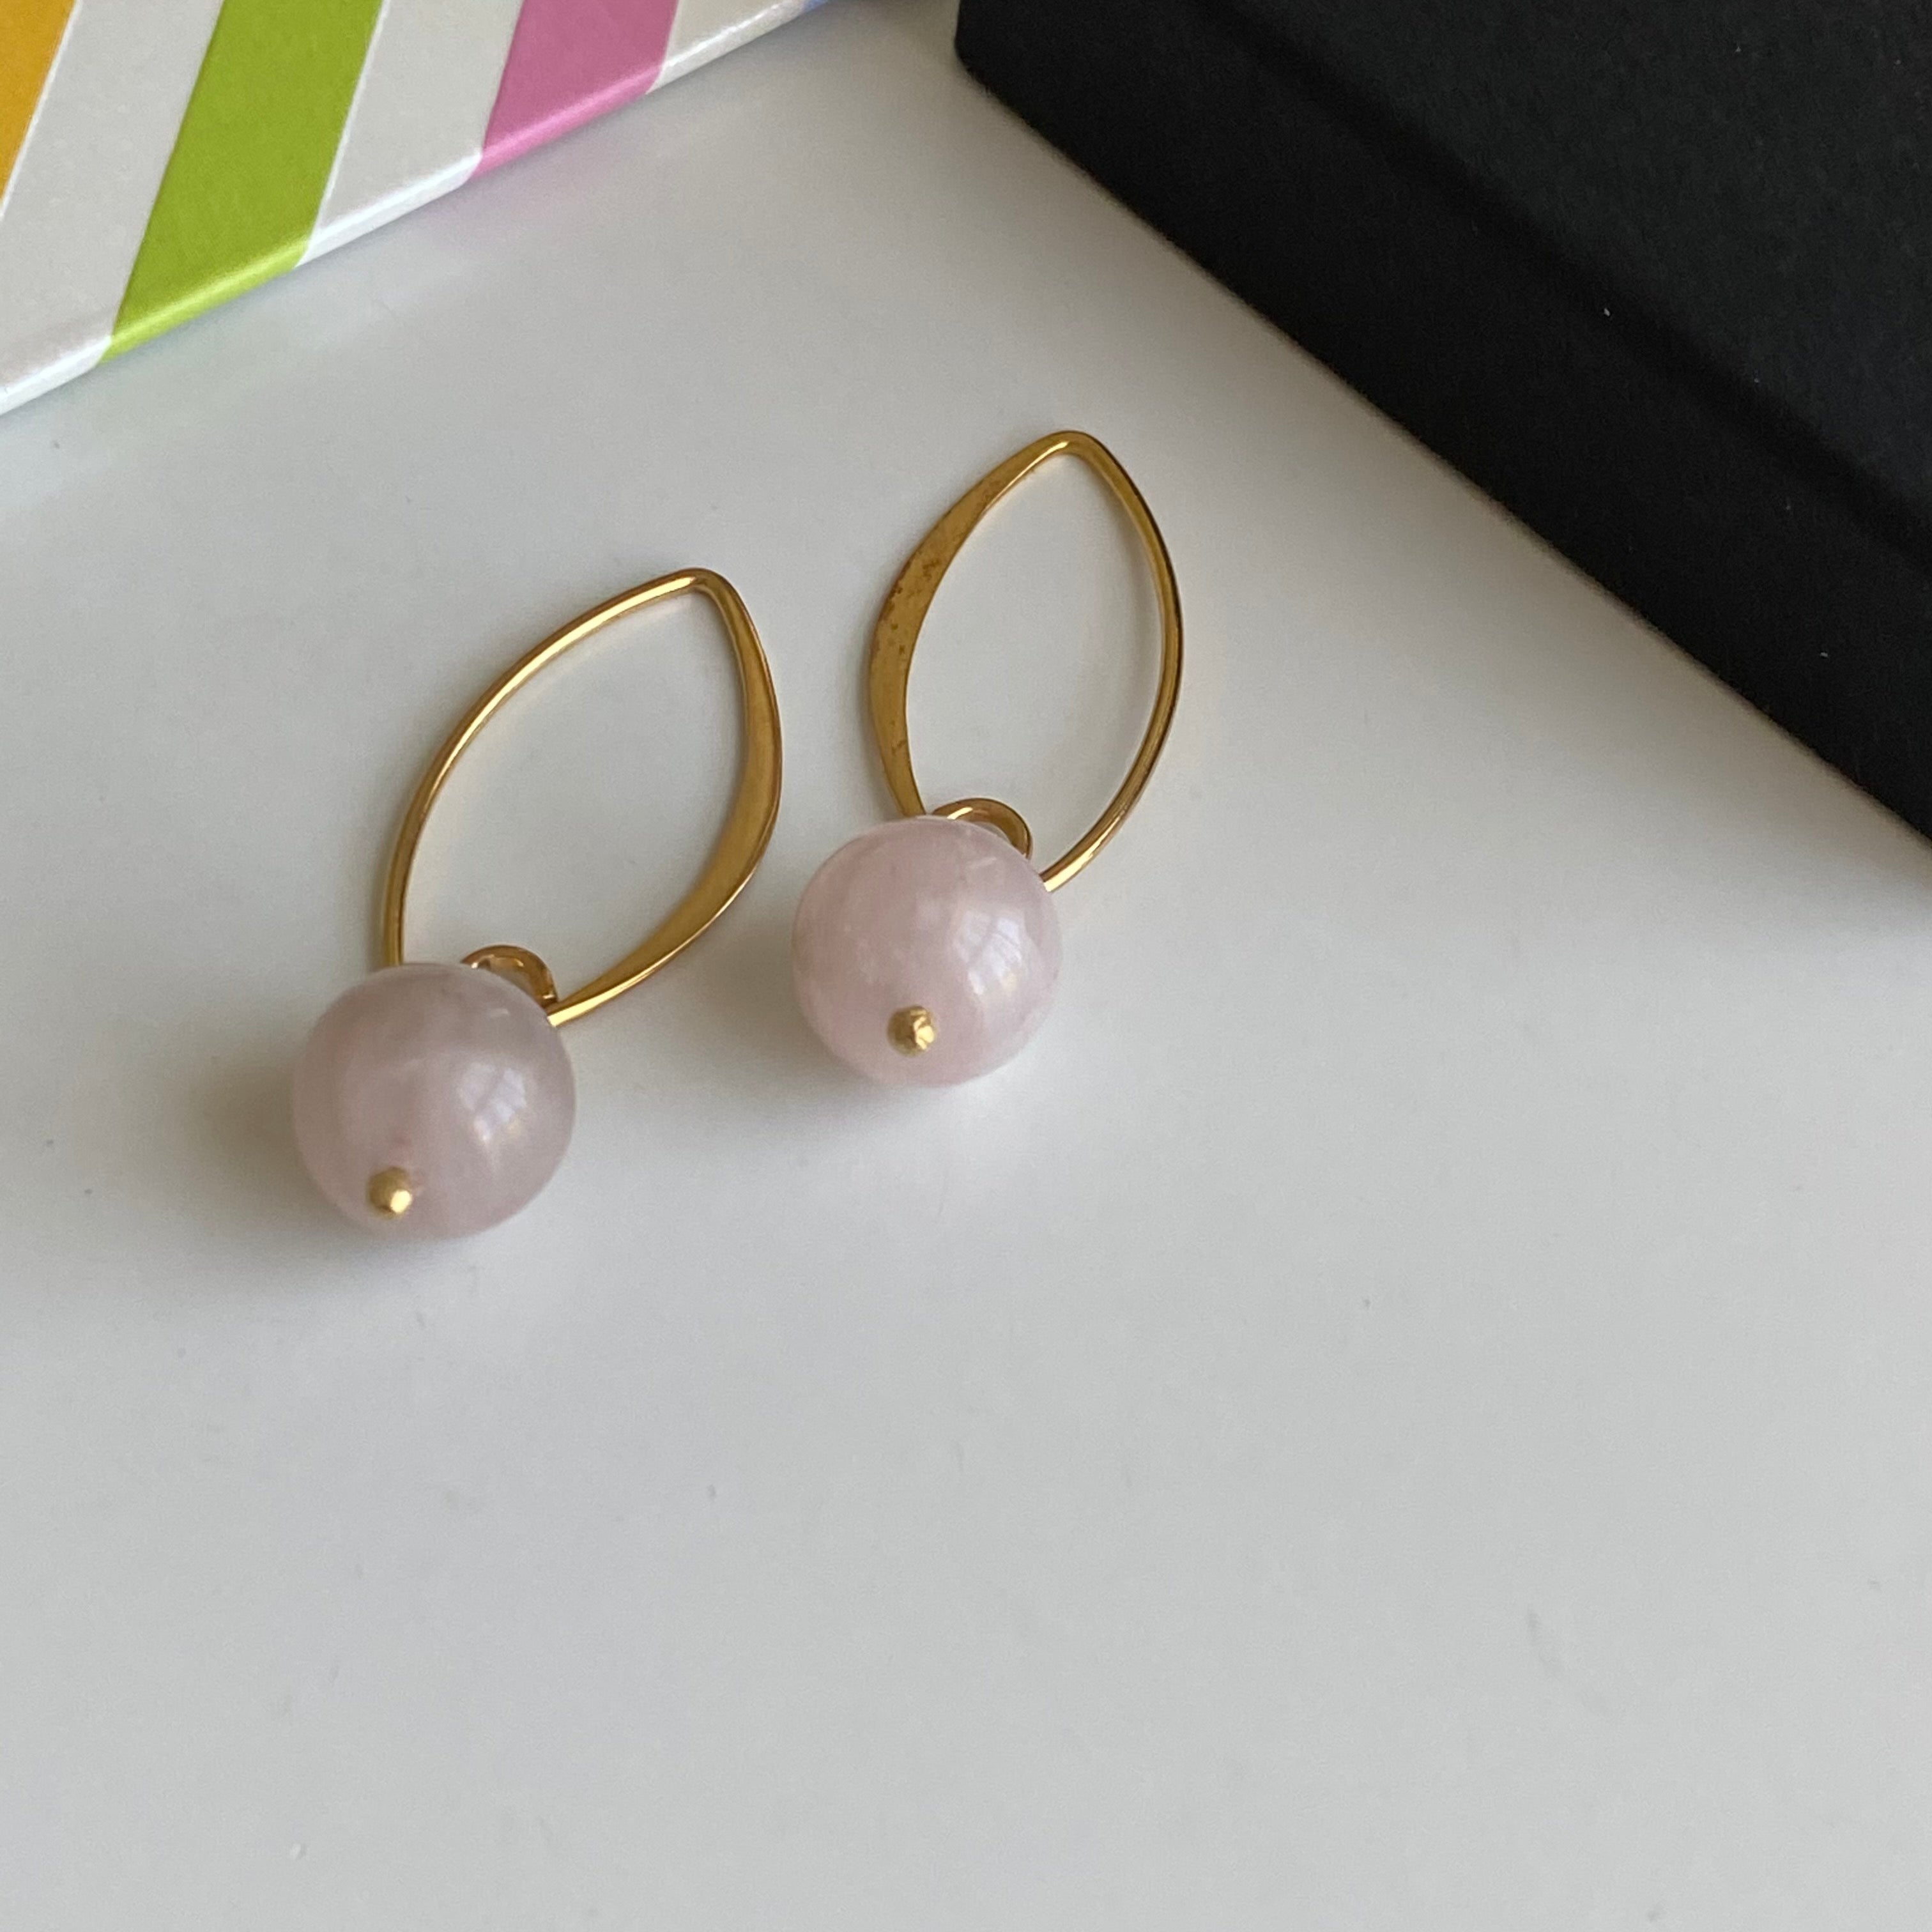 Gold Plated Sterling Silver Earrings with Rose Quartz Drop